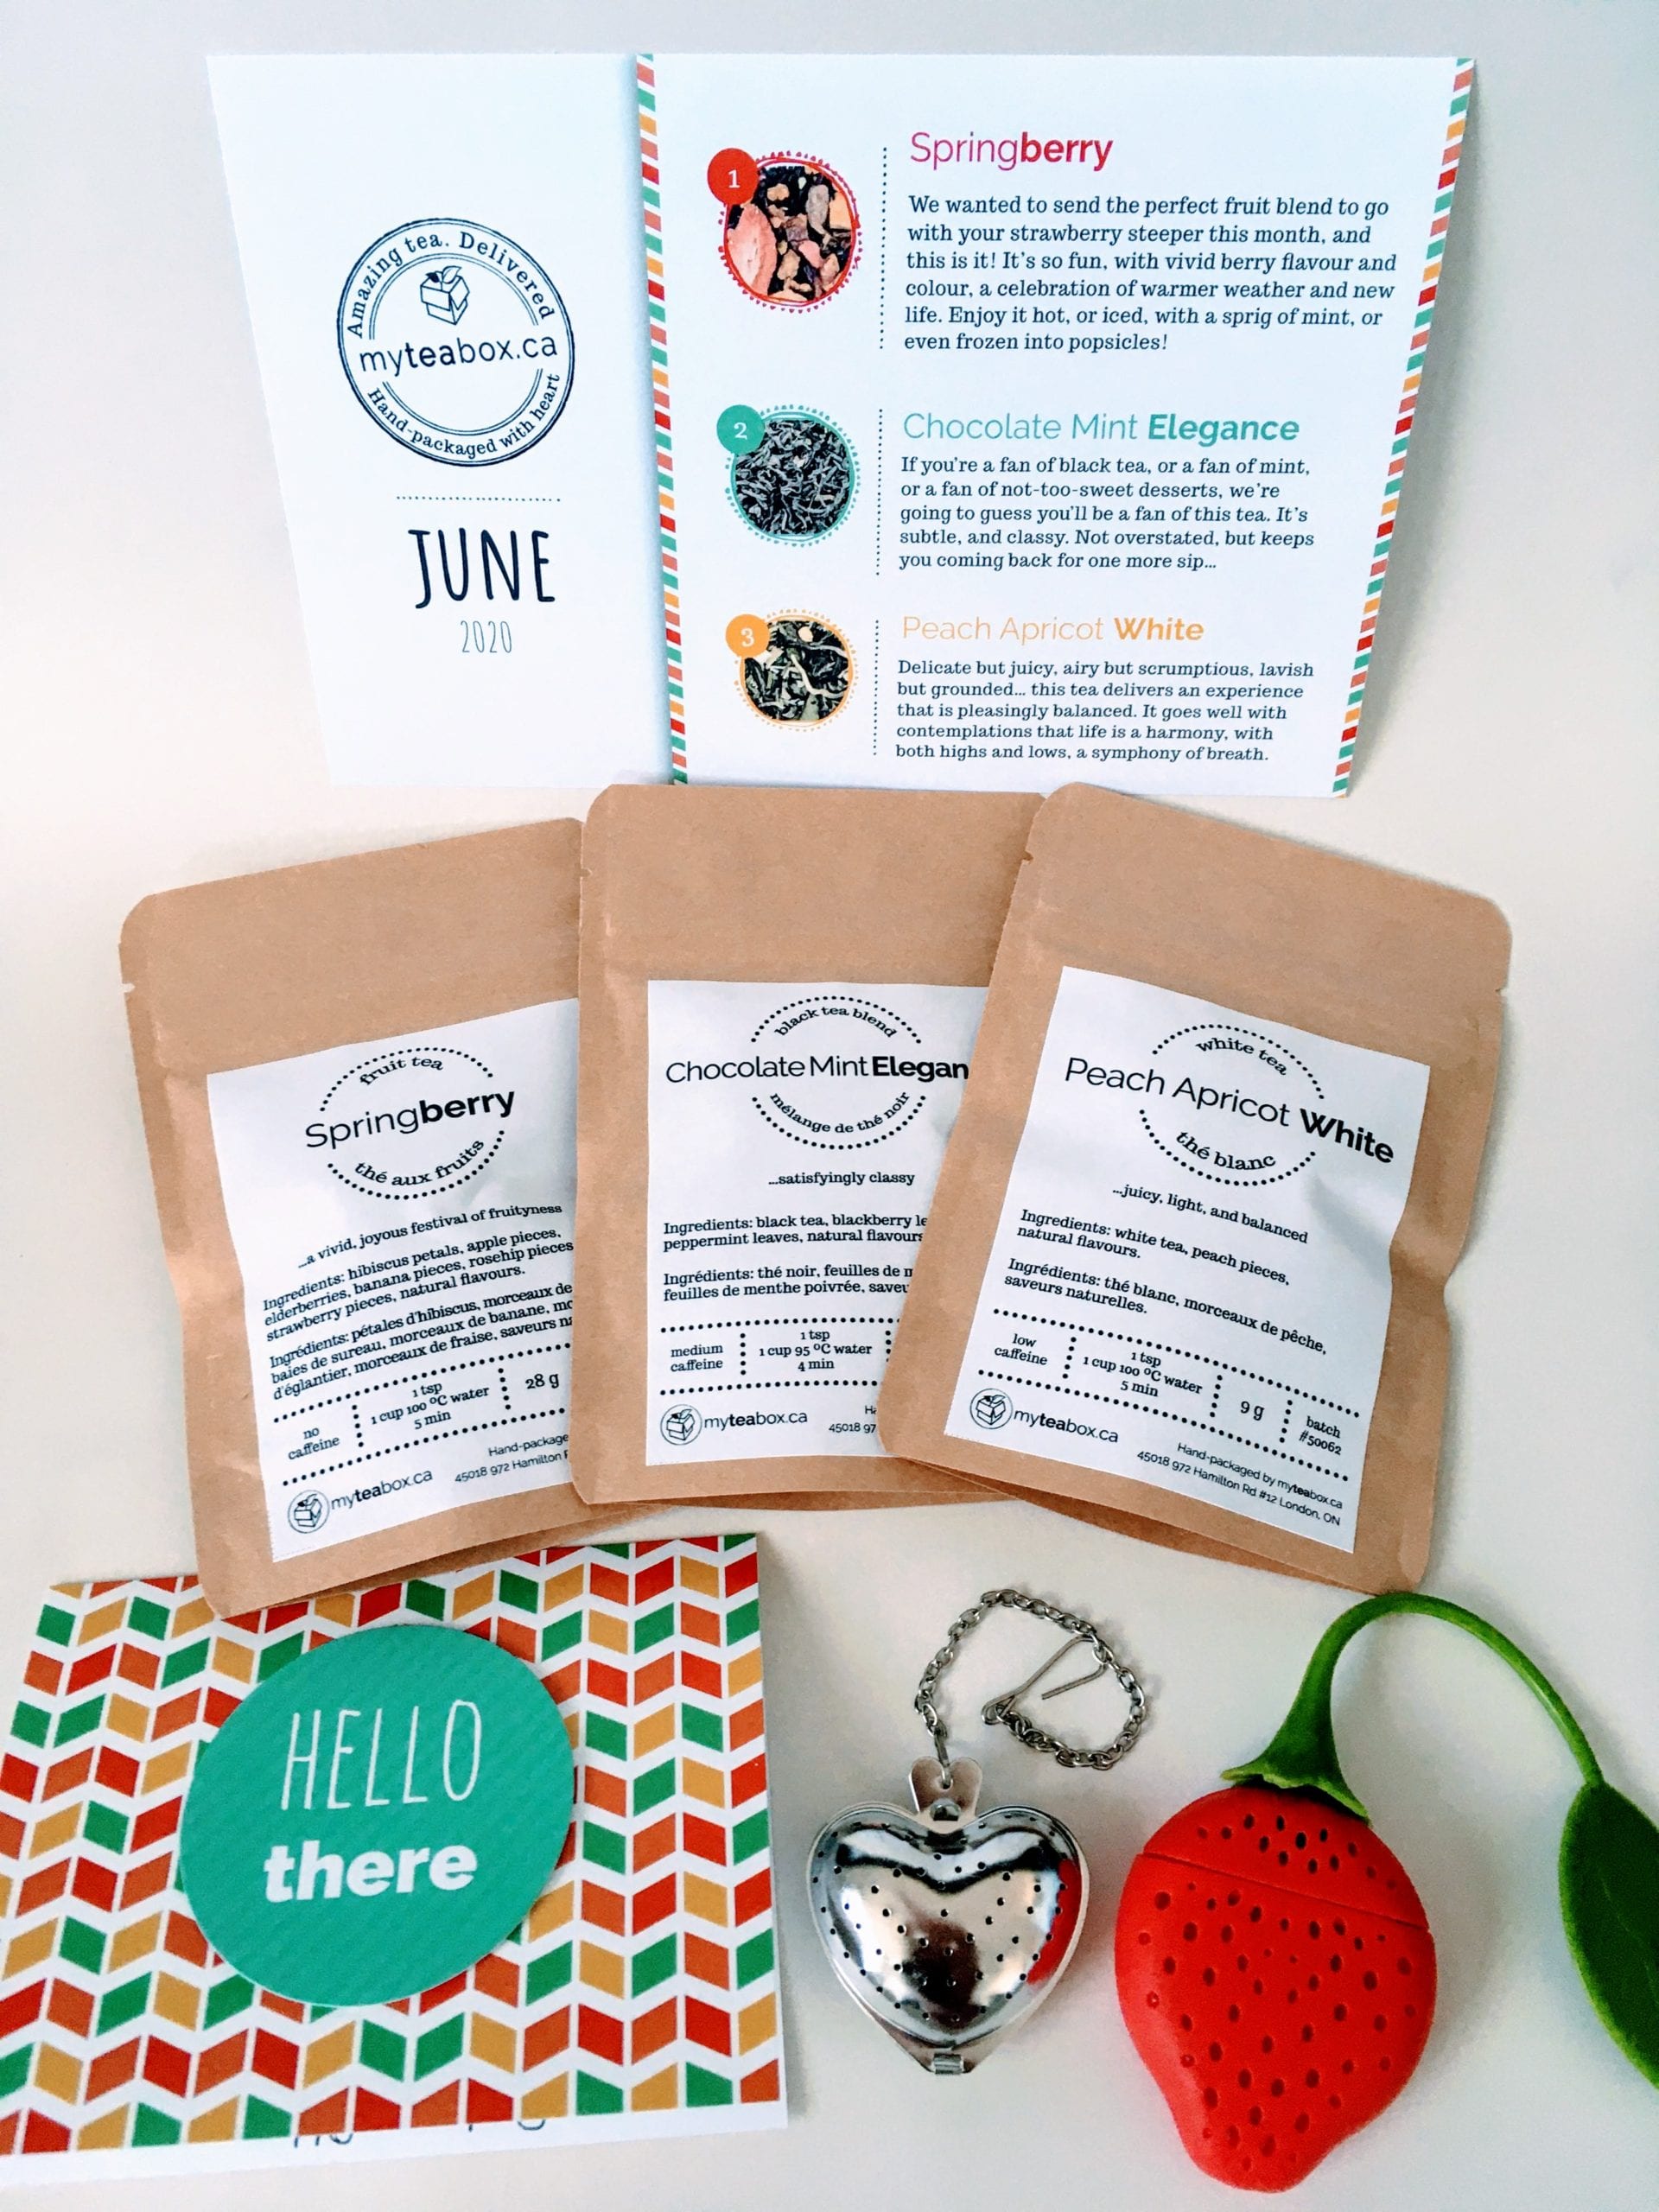 myteabox.ca… June 2020 Subscription Box Review & Coupon Code